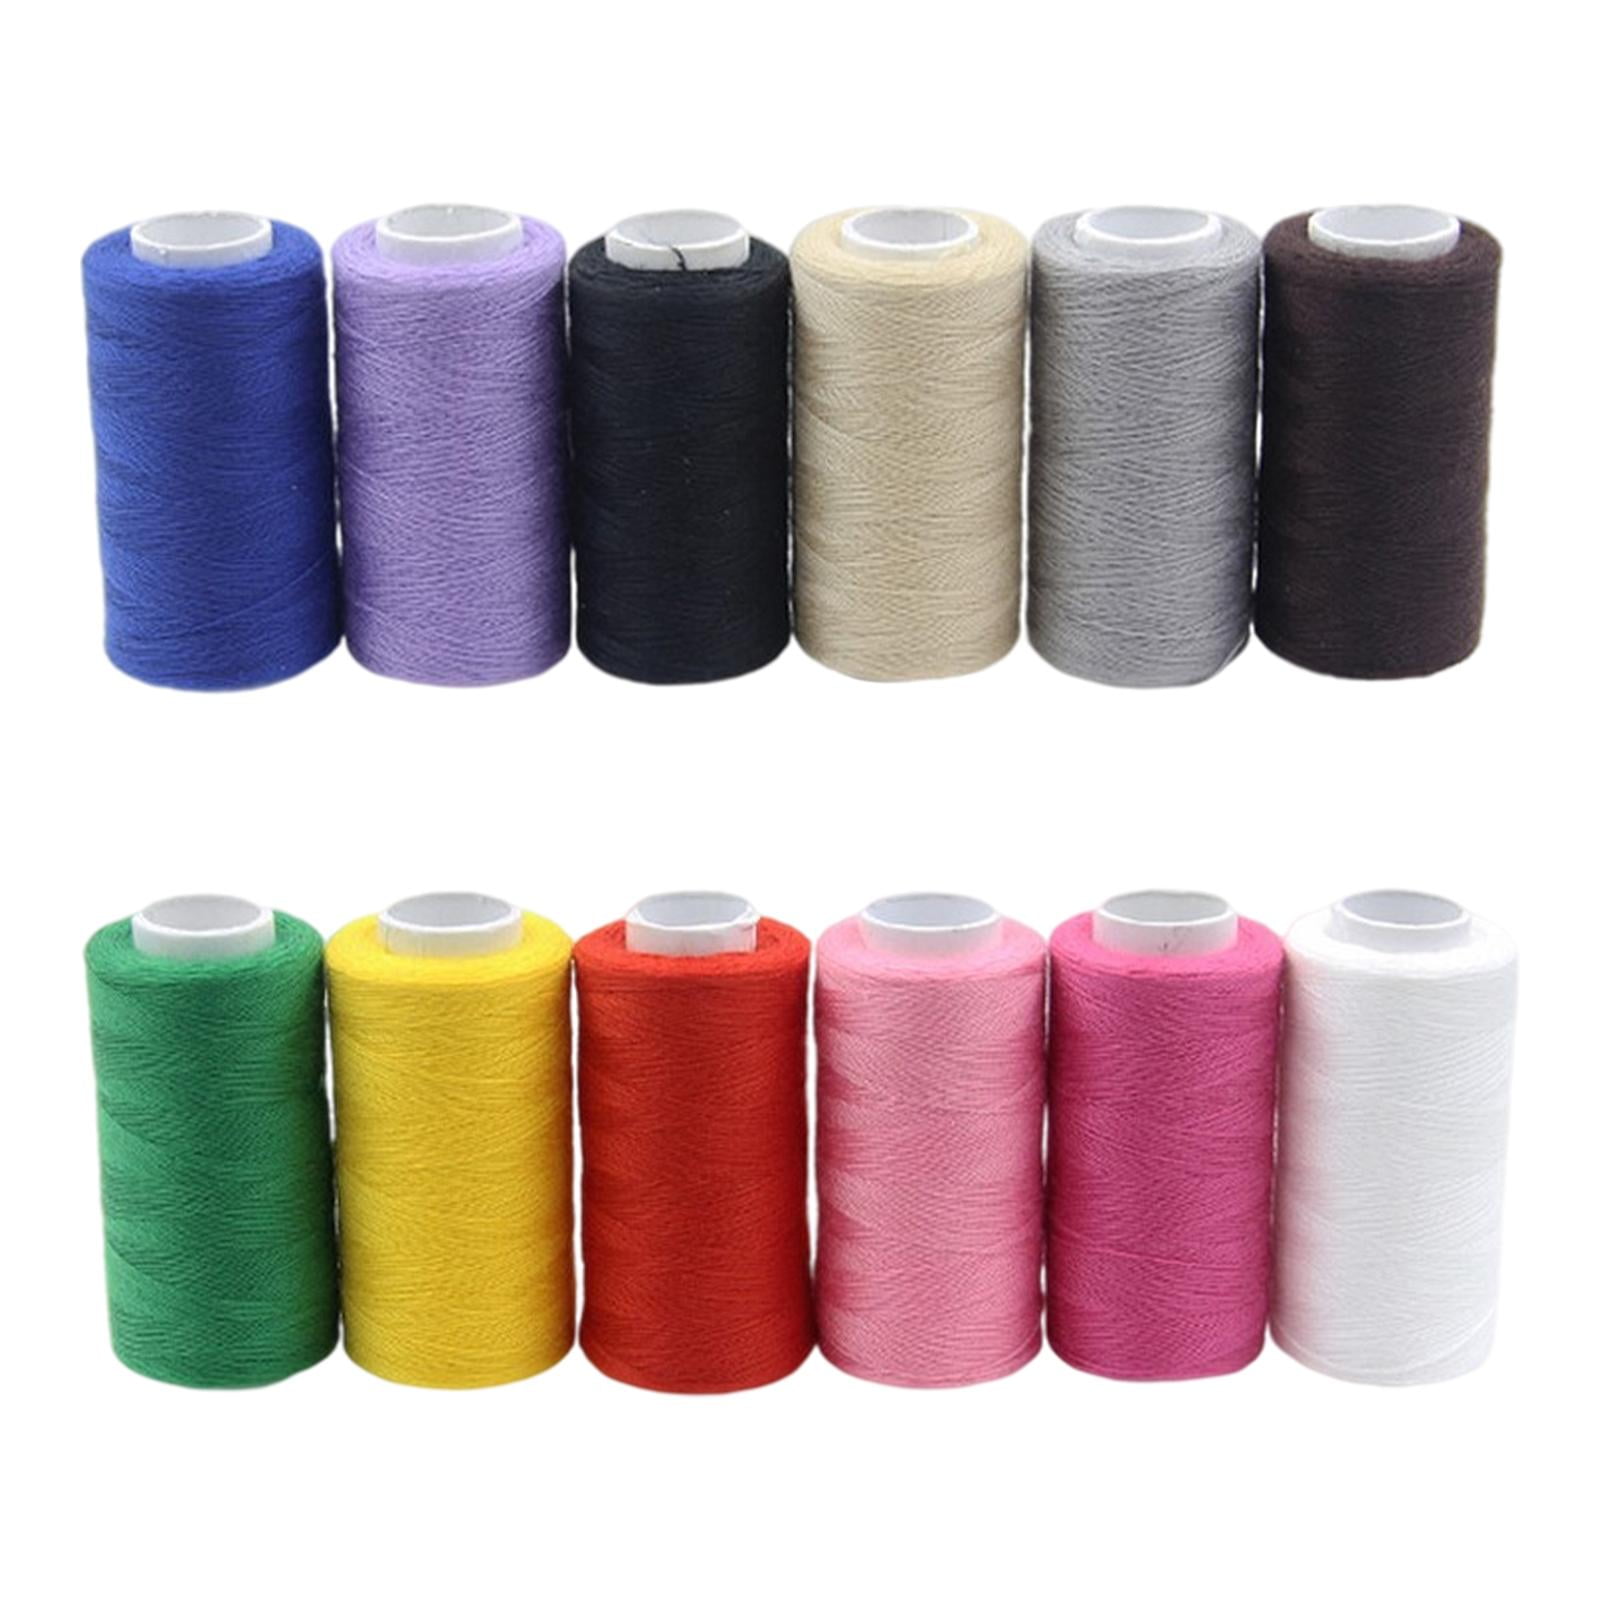 Sewing Threads Kits, 12 Colors Polyester 383 Yards Per Spools for